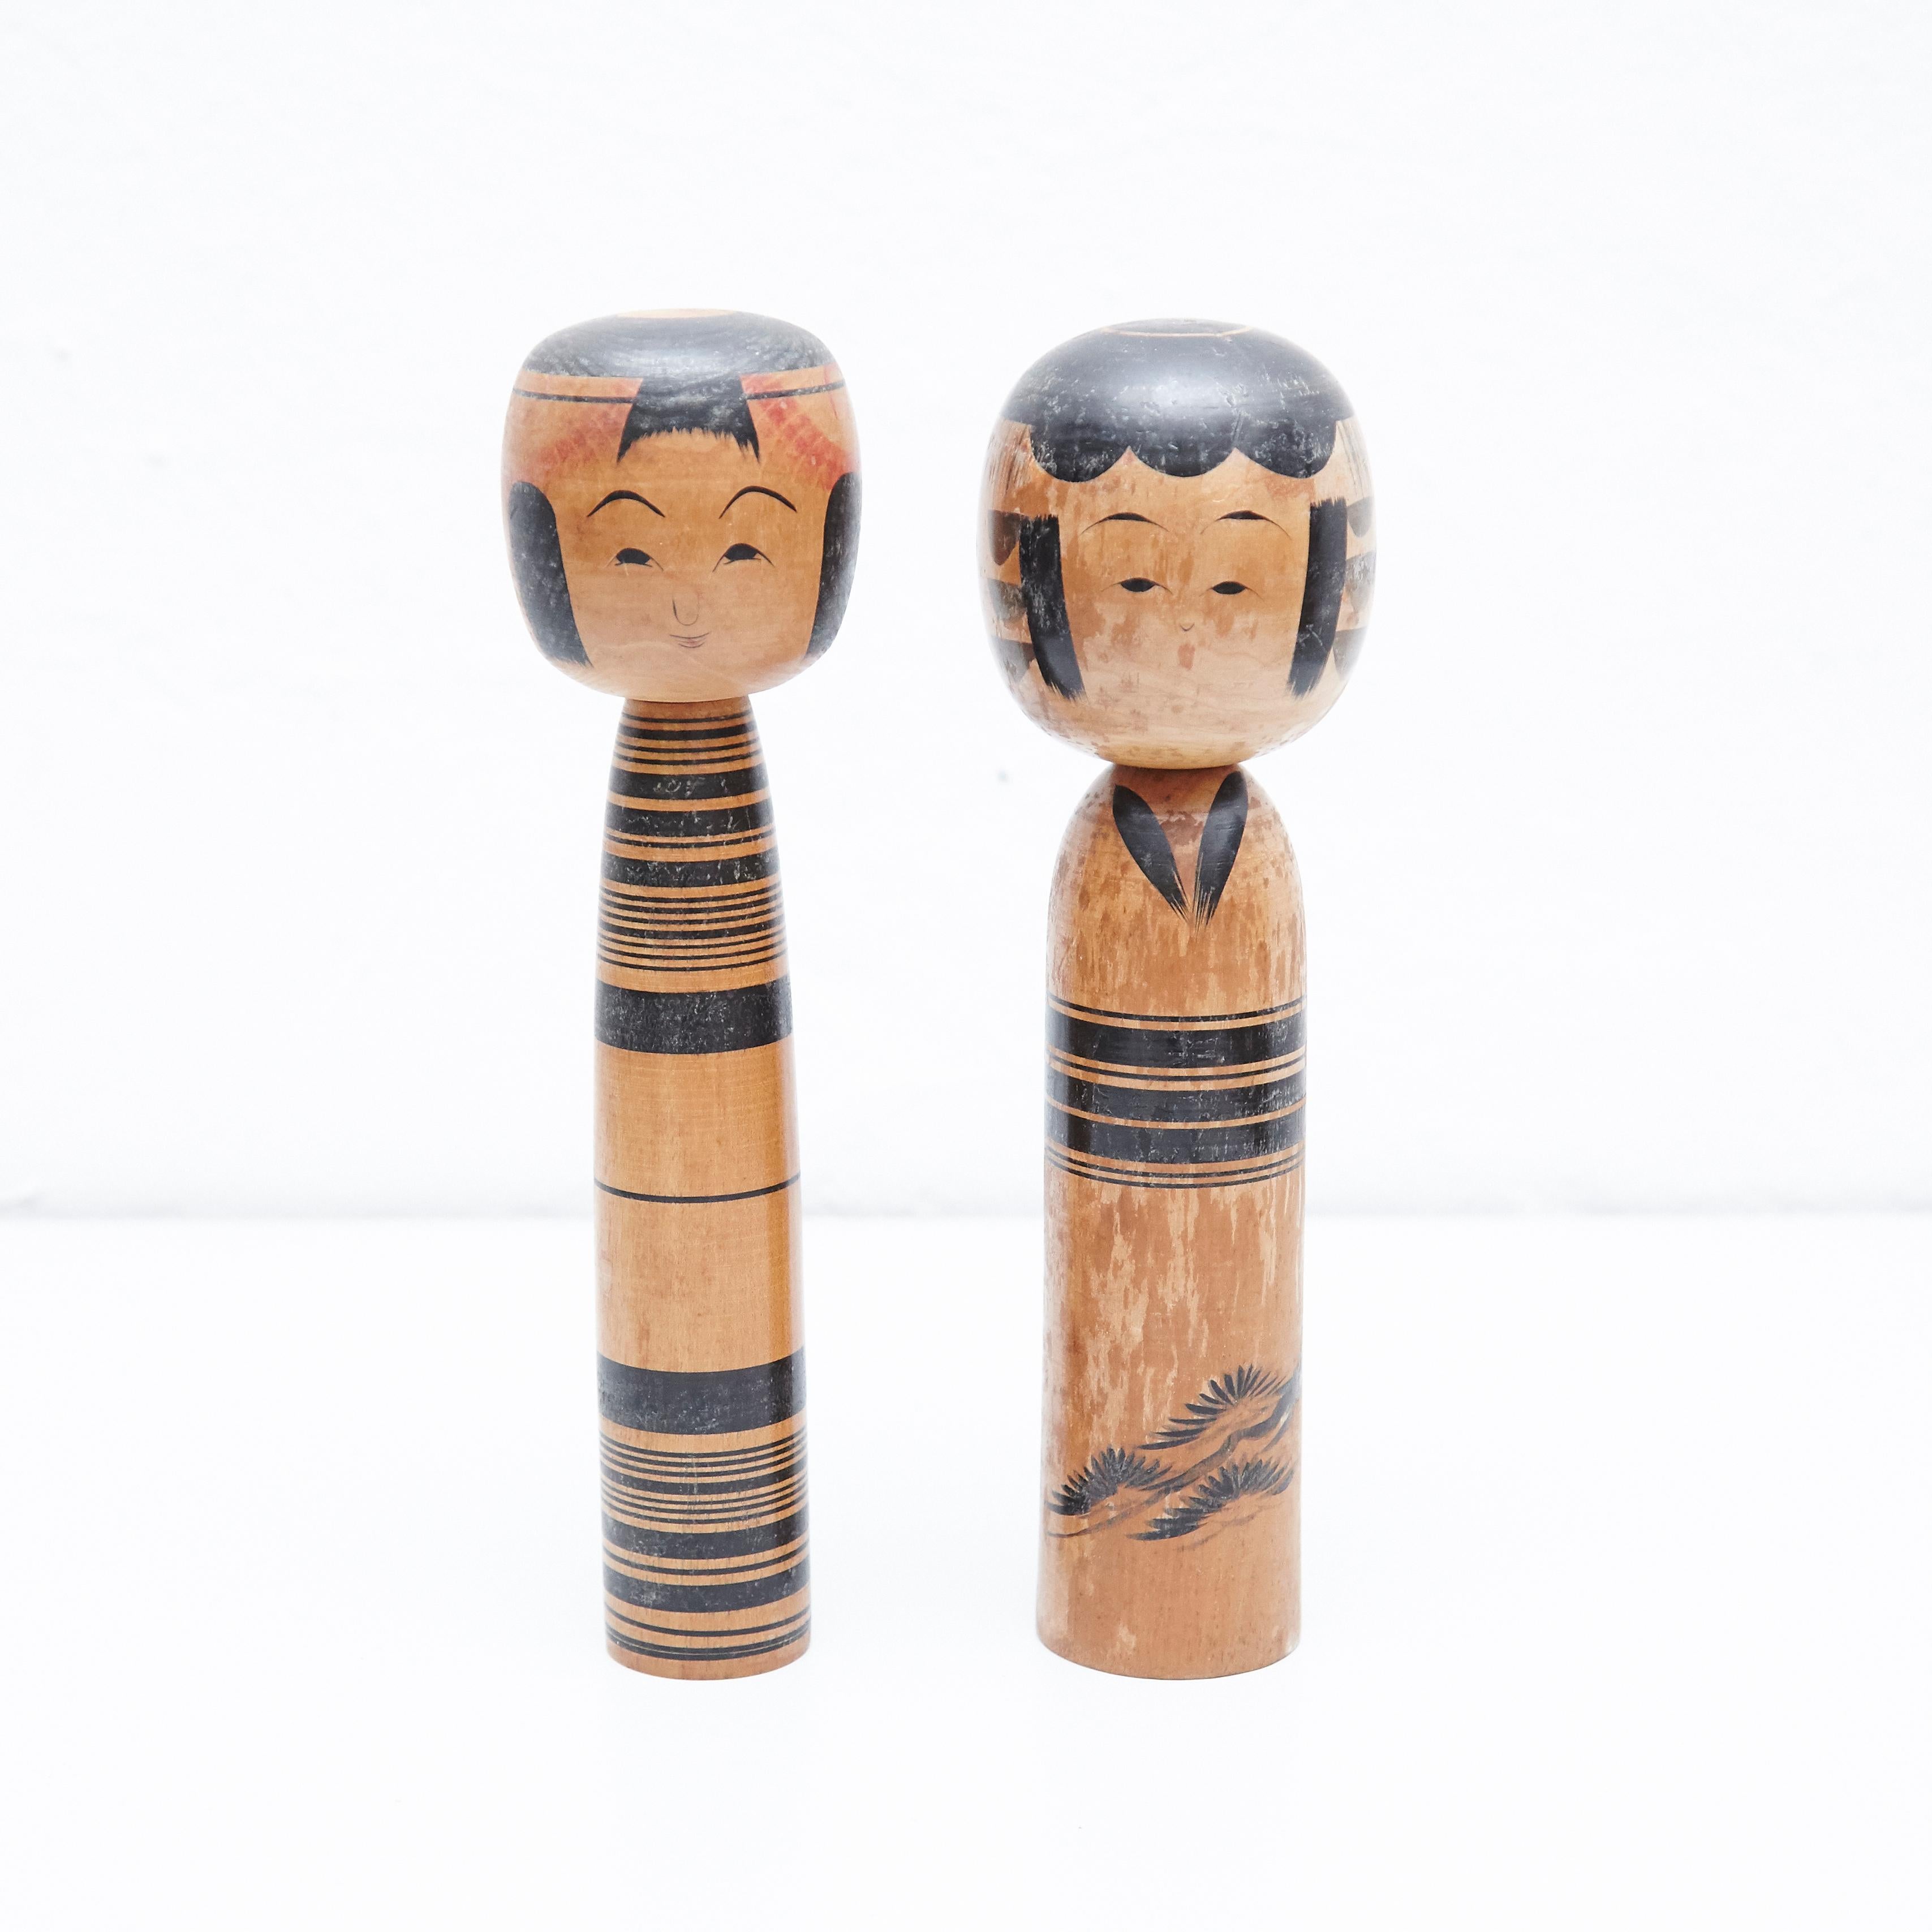 Japanese dolls called Kokeshi of the early 20th century.
Provenance from the northern Japan.
Set of 2.

Measures: 

24.5 x 7 cm
25 x 6.5 cm


Handmade by Japanese artisants from wood. Have a simple trunk as a body and an enlarged head. One